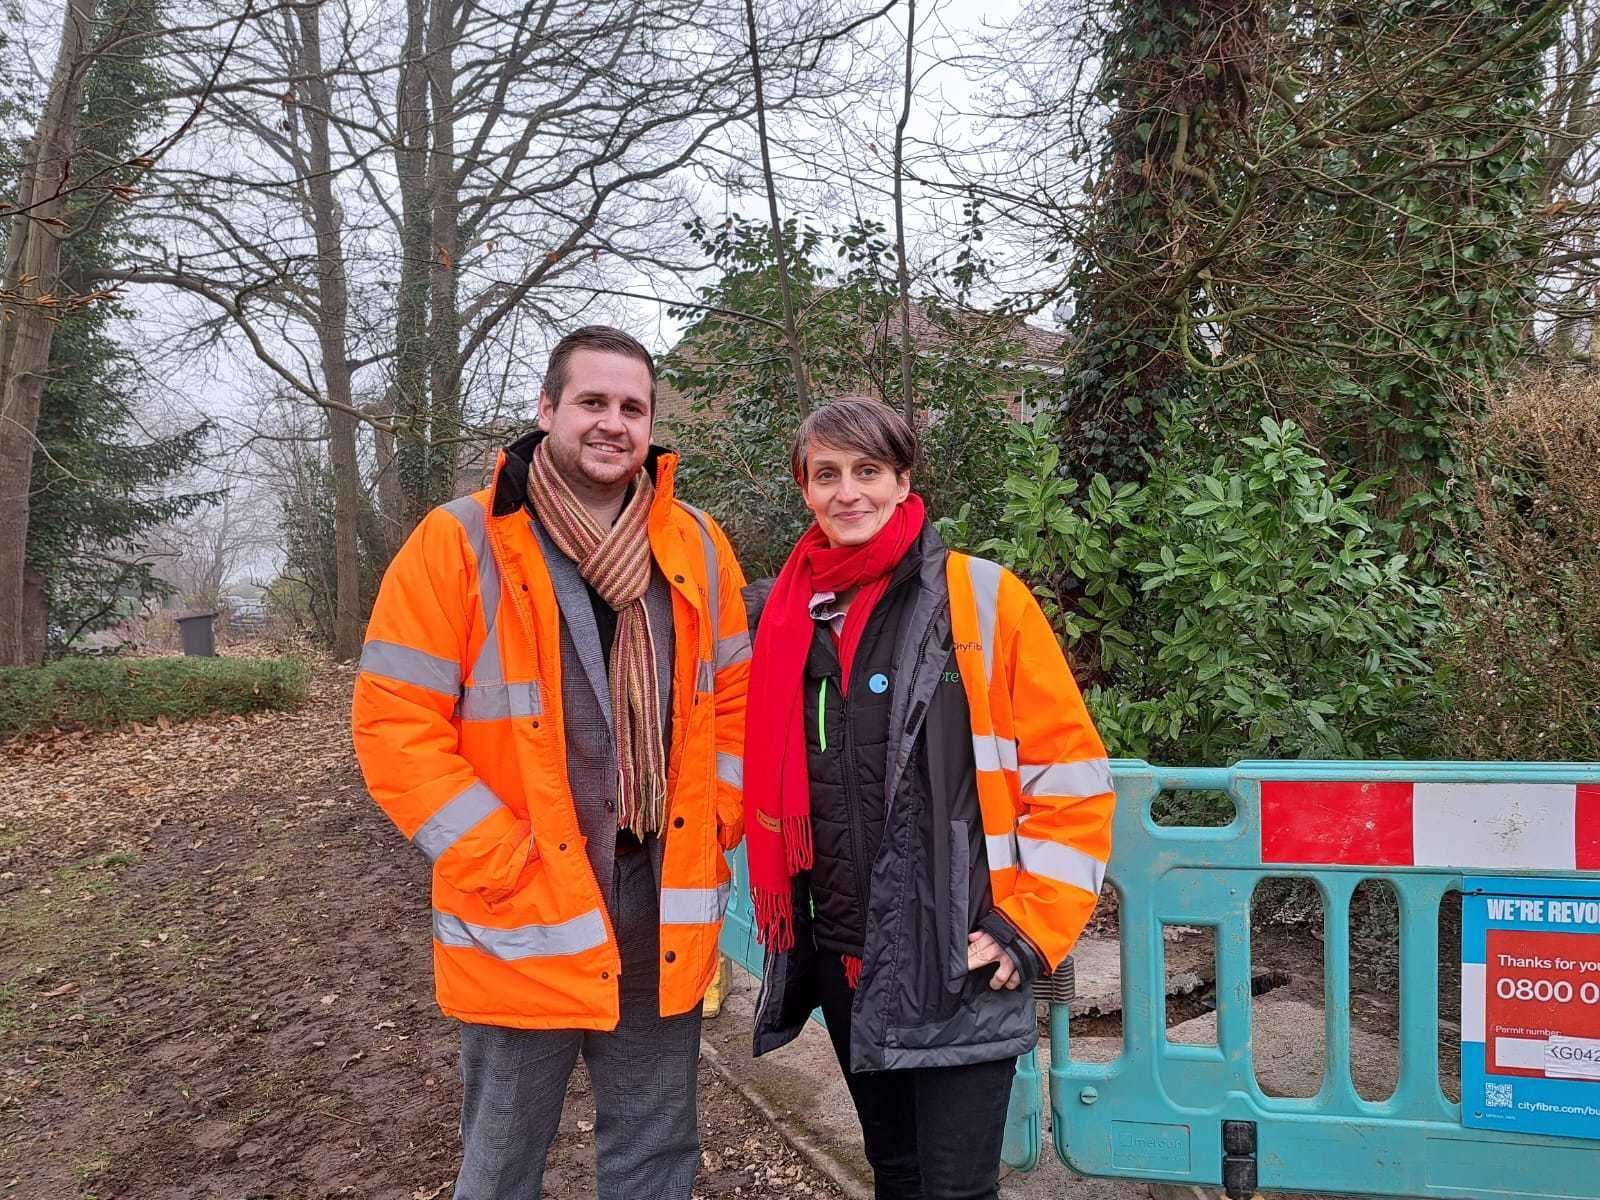 Ben Englefield, city build manager, and Anne Krausse, area manager for Medway